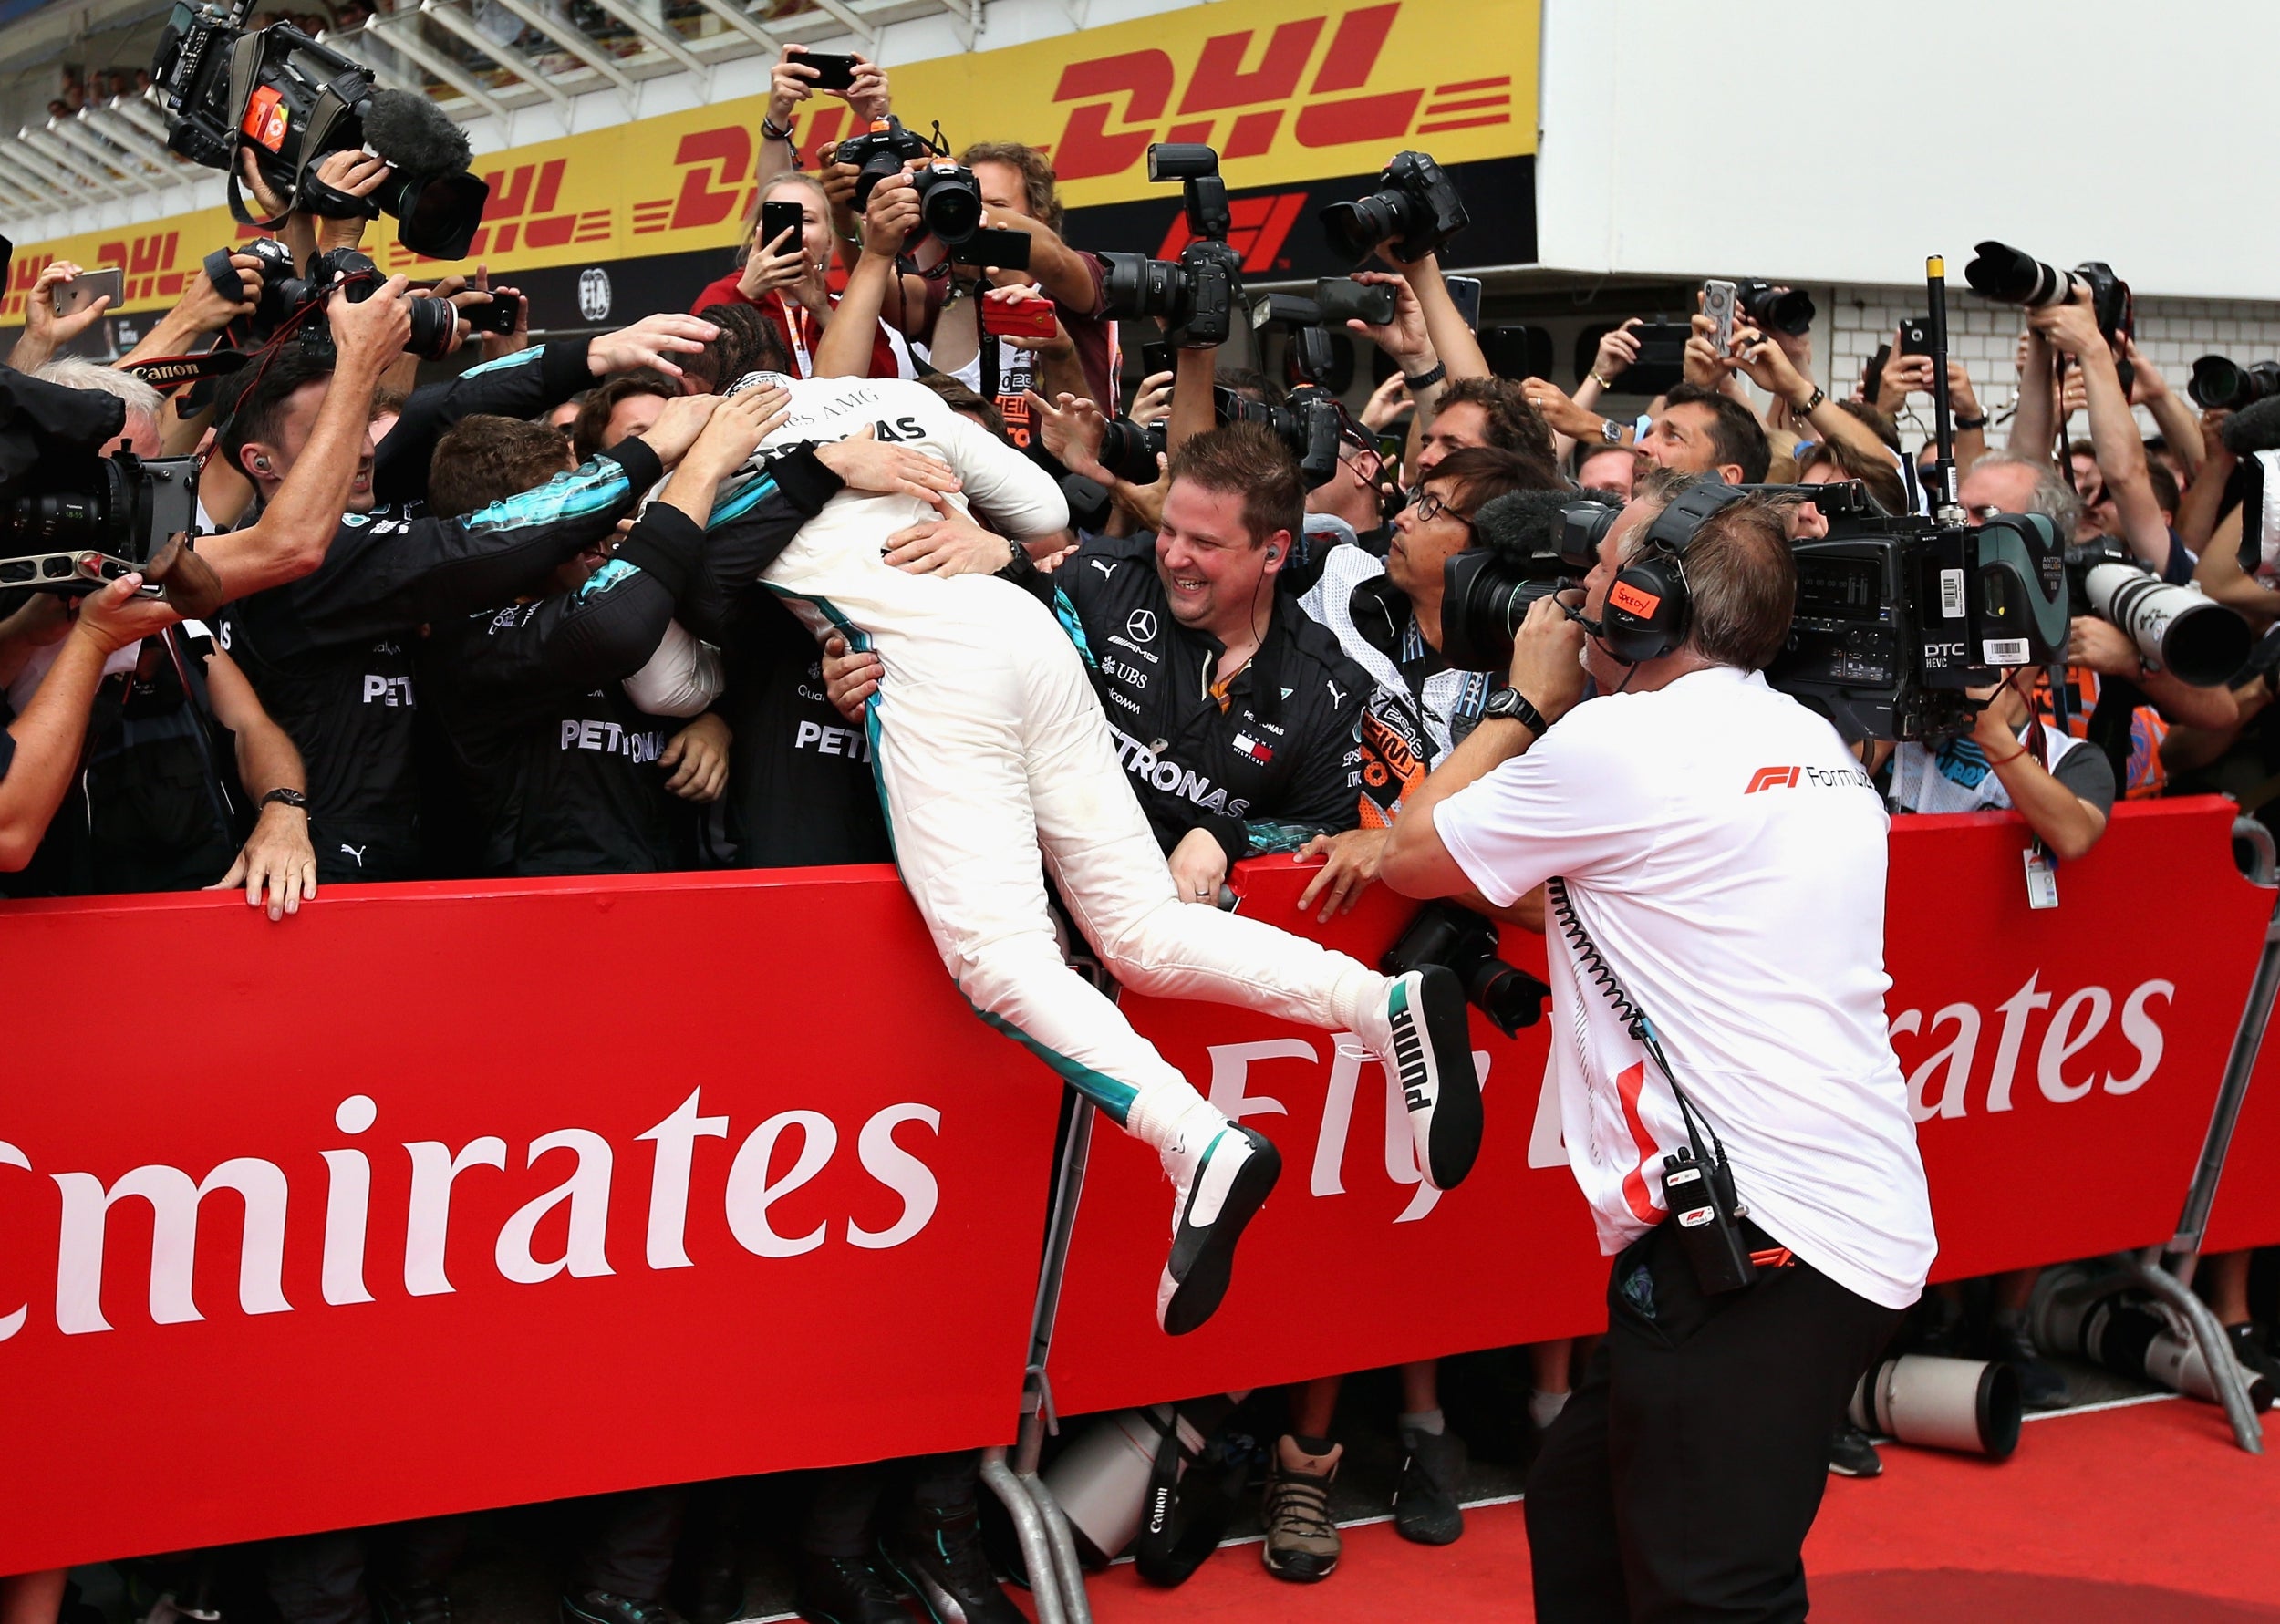 Hamilton pulled off a remarkable victory after fighting back from 14th on the grid